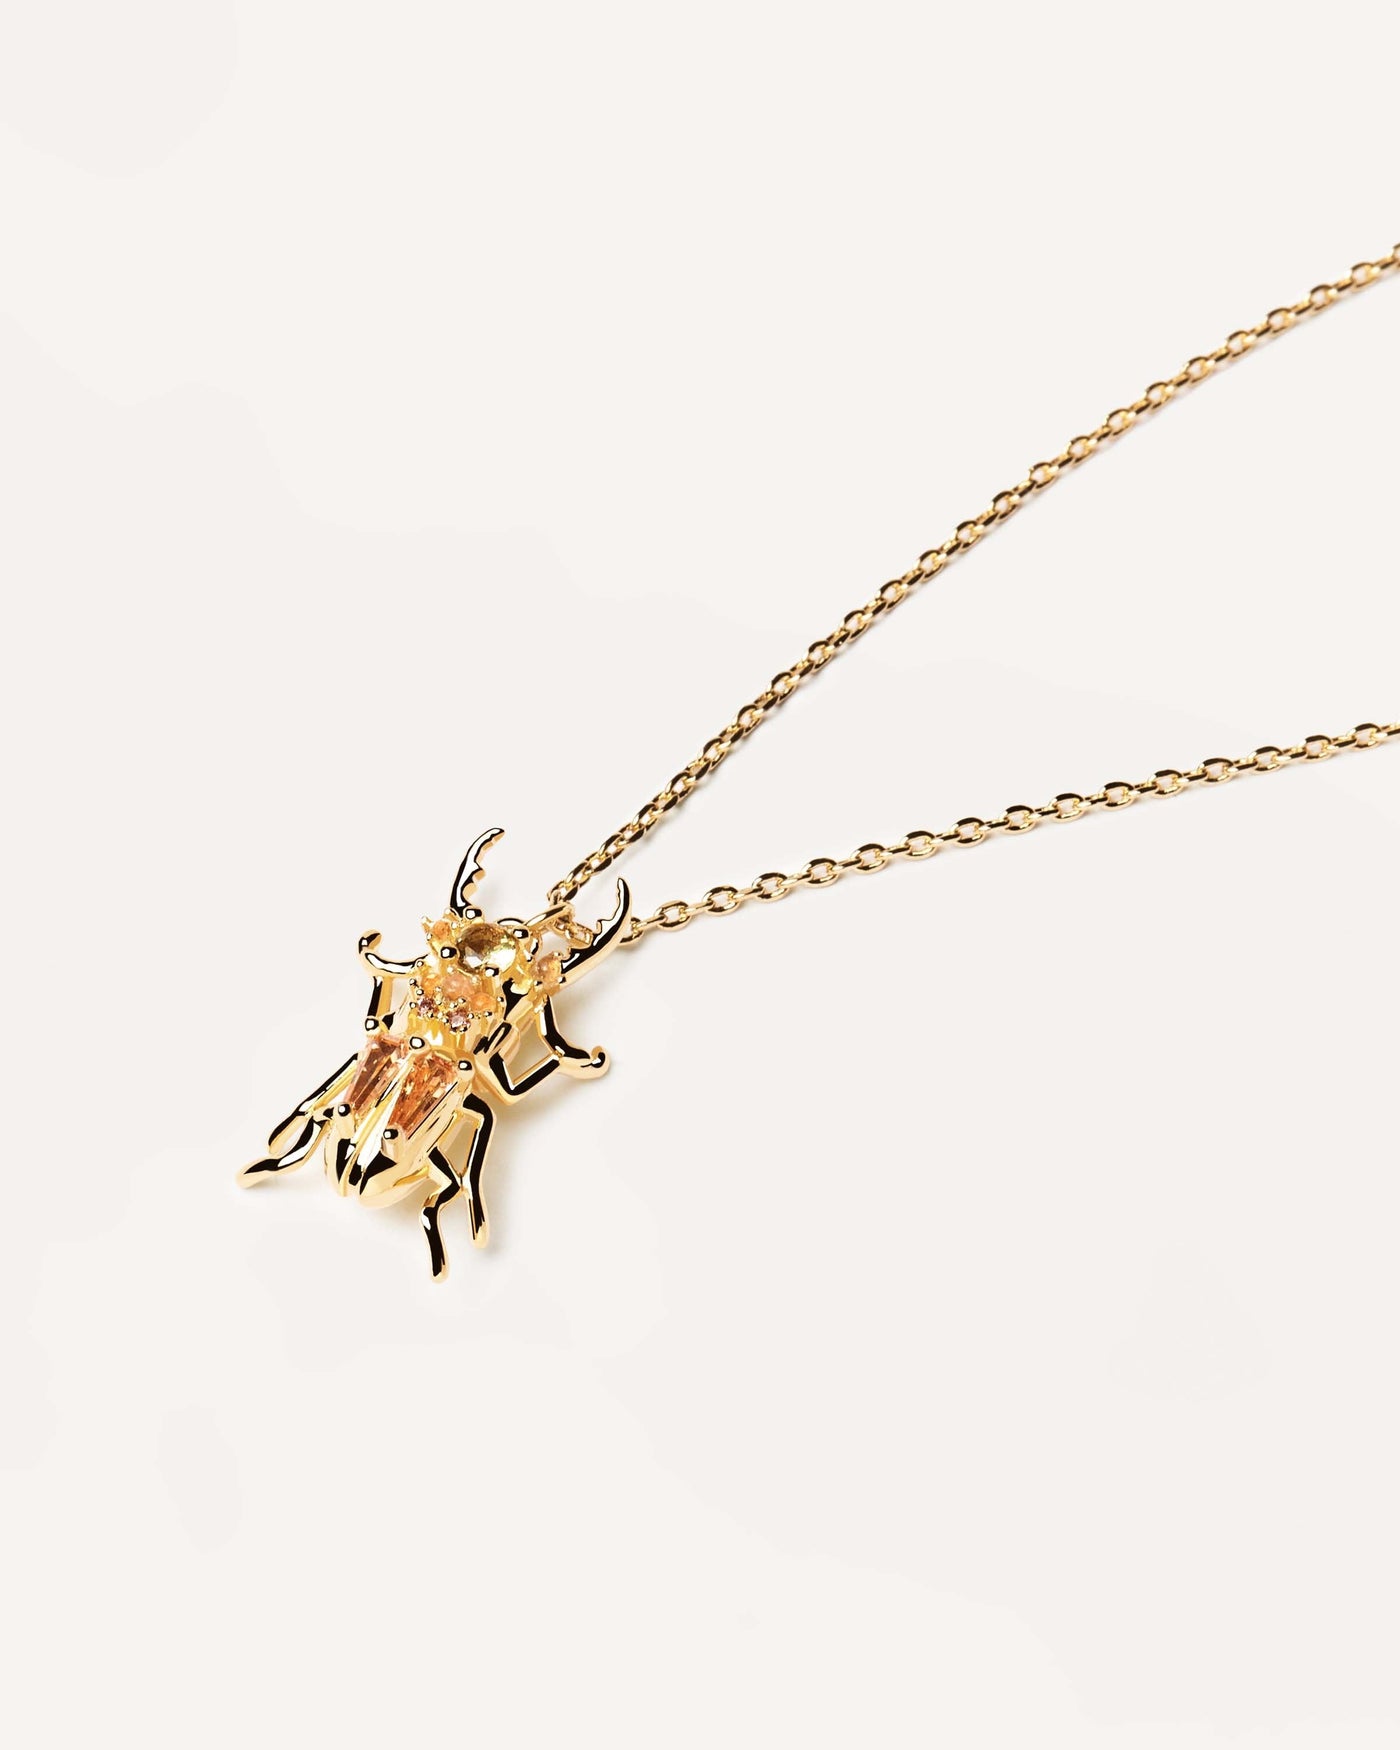 2023 Selection | Courage Beetle Gold Necklace. Get the latest arrival from PDPAOLA. Place your order safely and get this Best Seller. Free Shipping over 40€